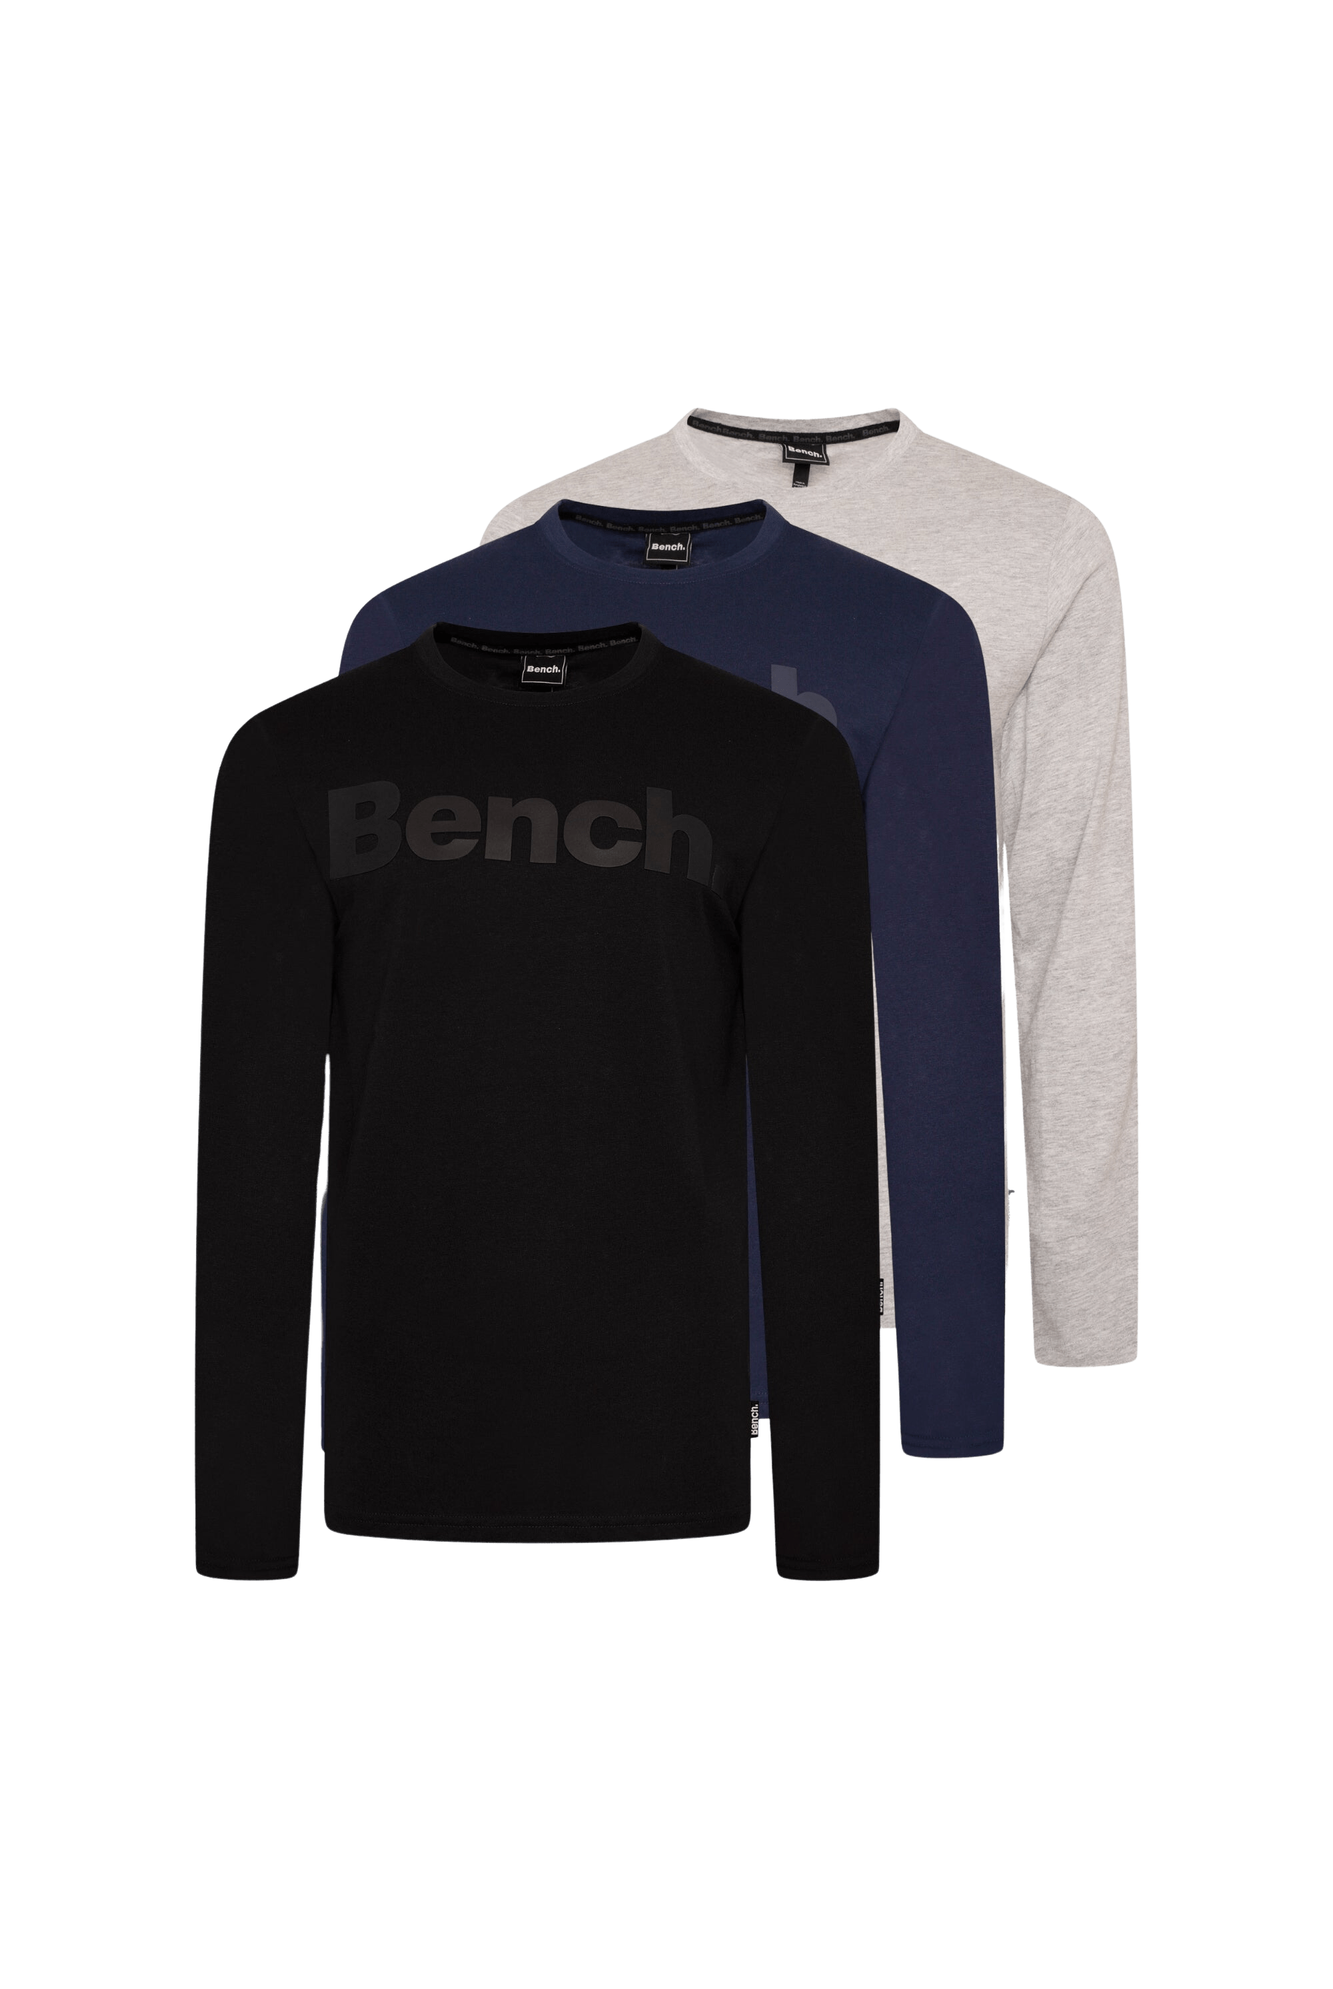 Bench: Value Multipack Tees, Tracksuits & More for Men & Women – Bench  Clothing - Mens, Womens